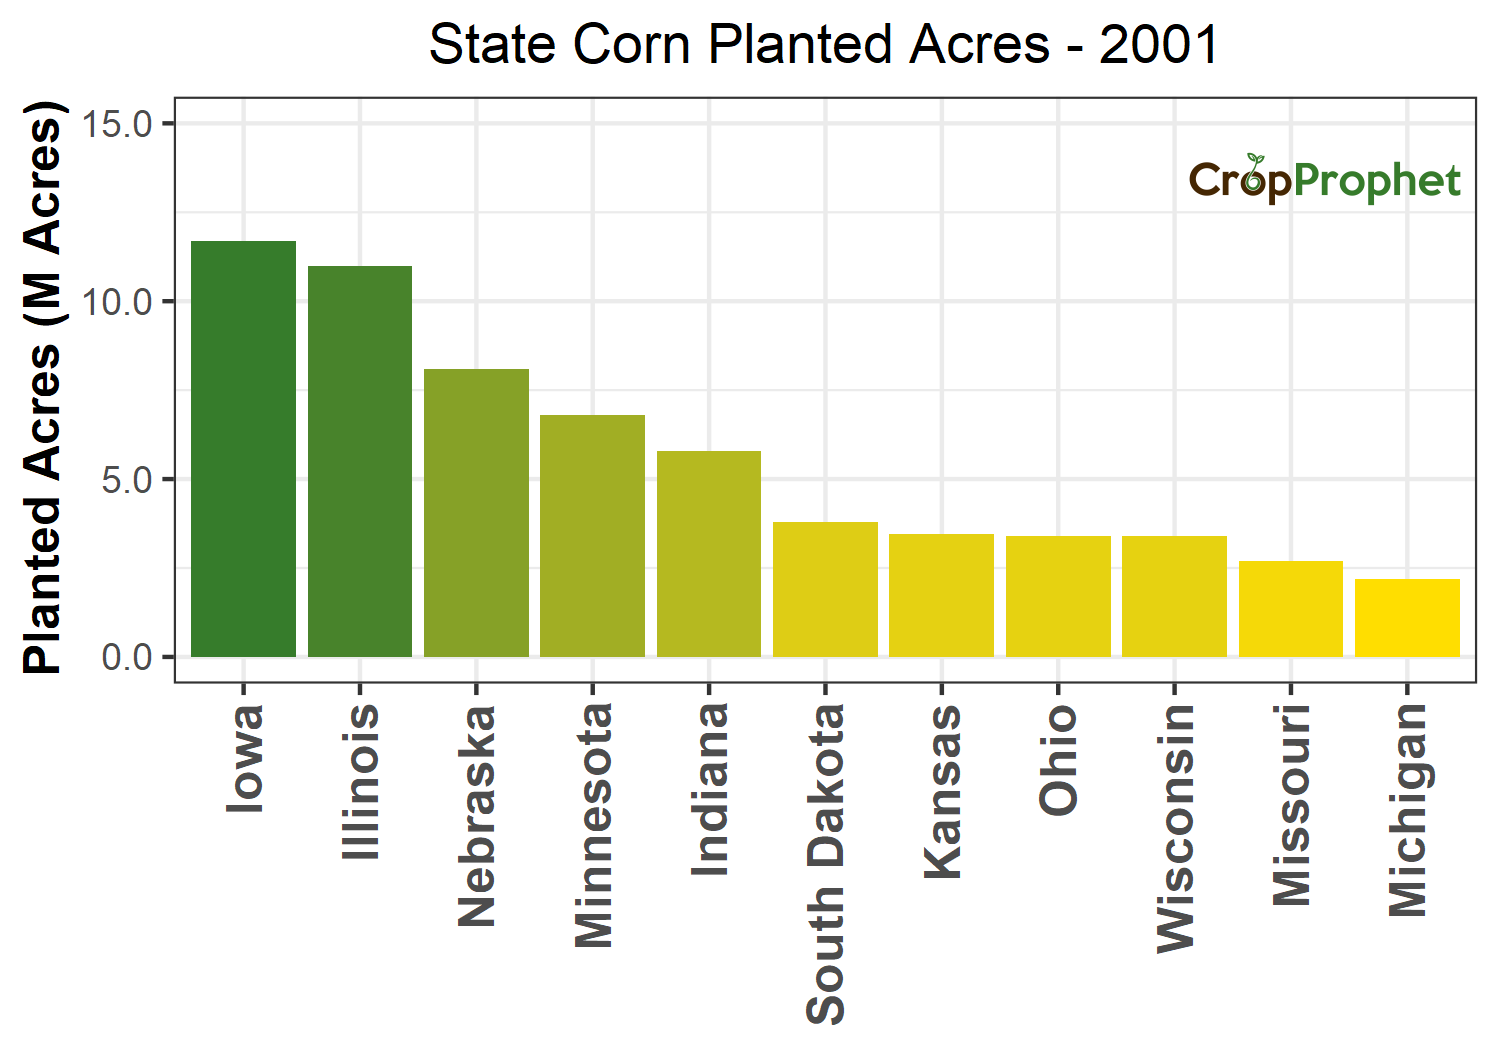 Corn Production by State - 2001 Rankings